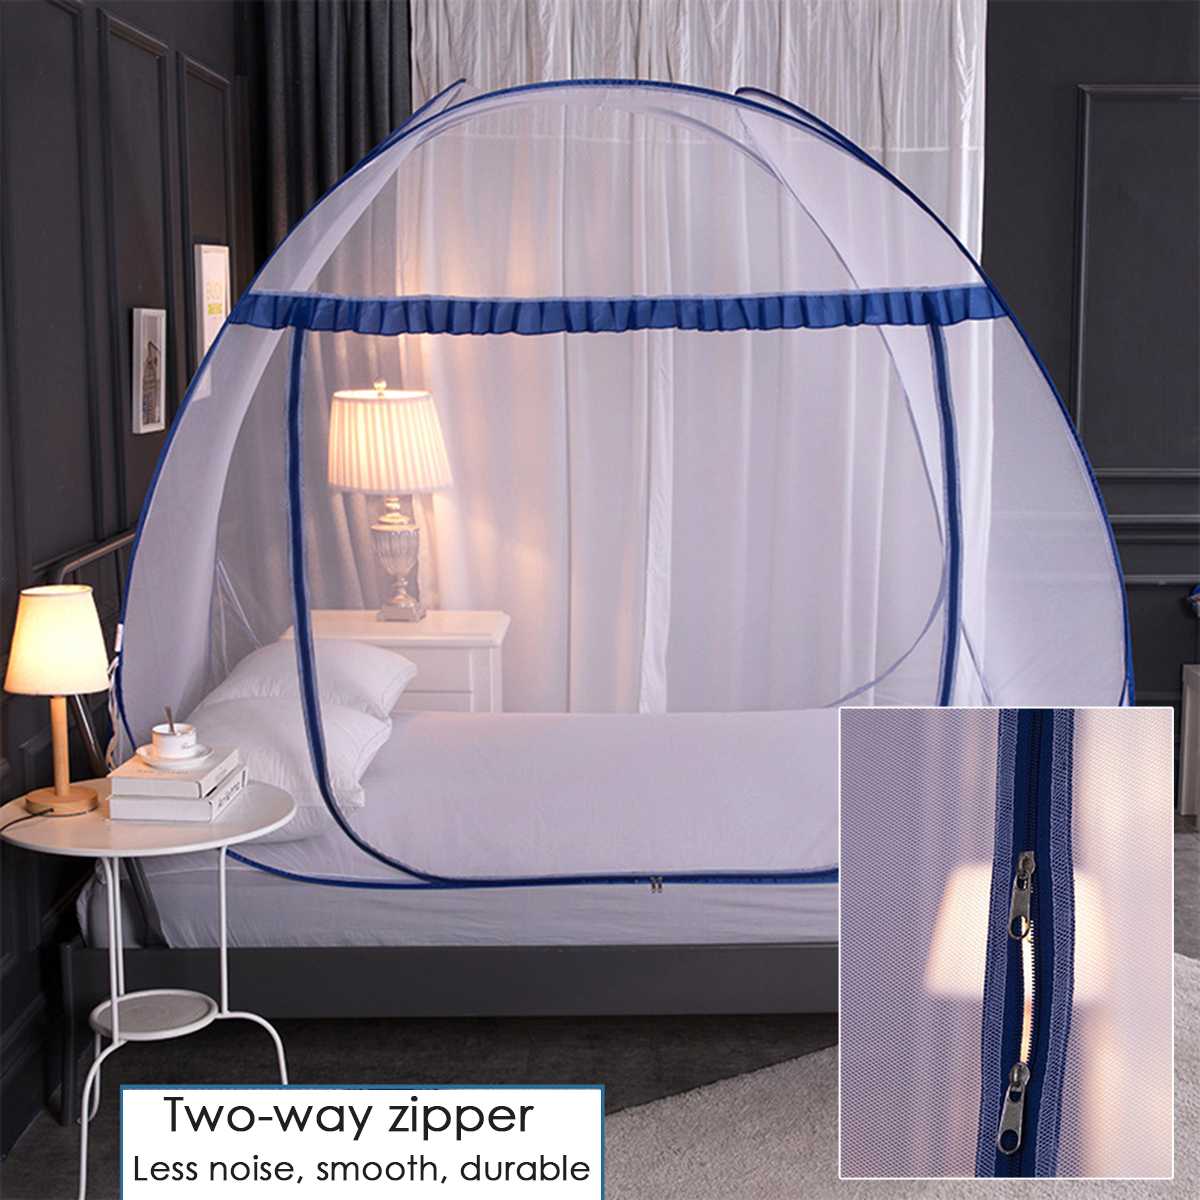 Foldable Yurt Mosquito Net Moustiquaire Net For Single Double Bed Mosquitera Canopy Netting Kids Bed Tent Home Decor Outdoor New